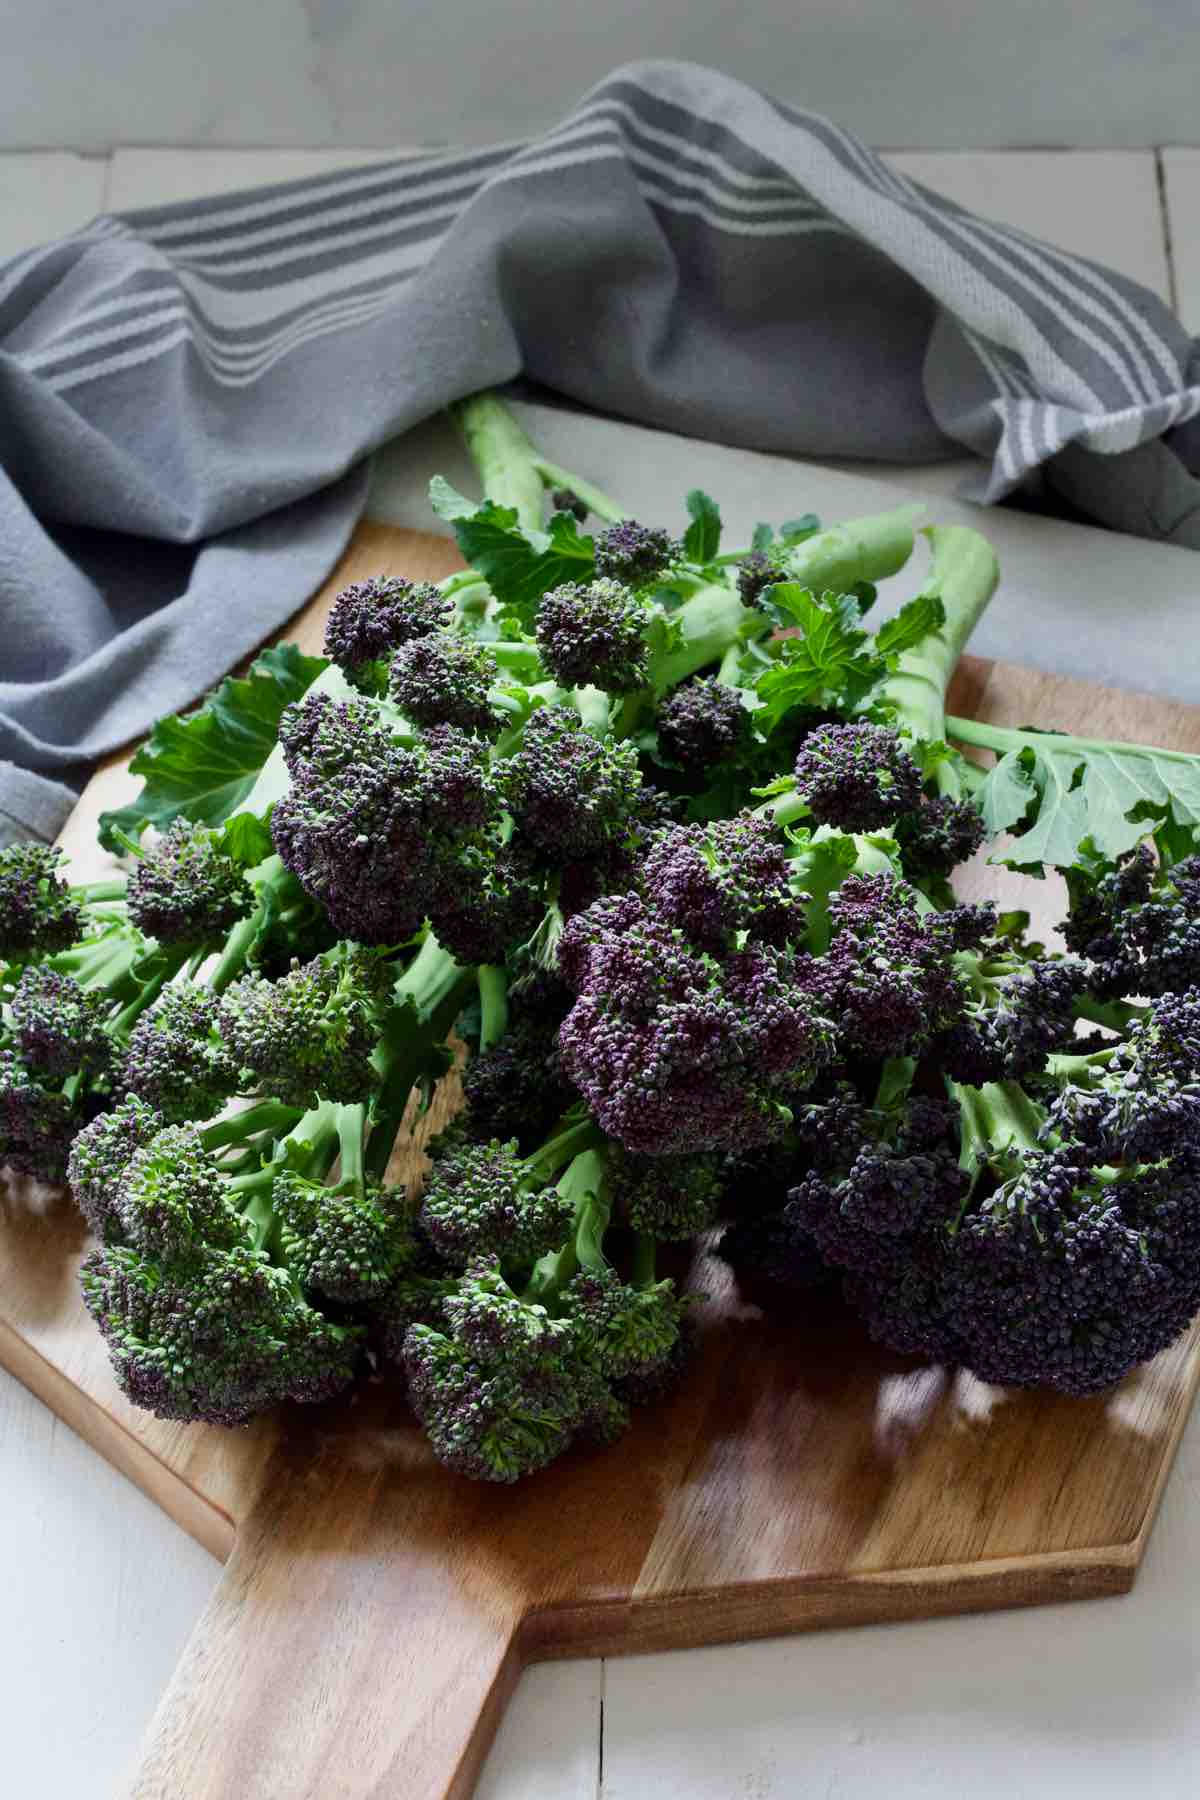 Bunch of PSB on a board.